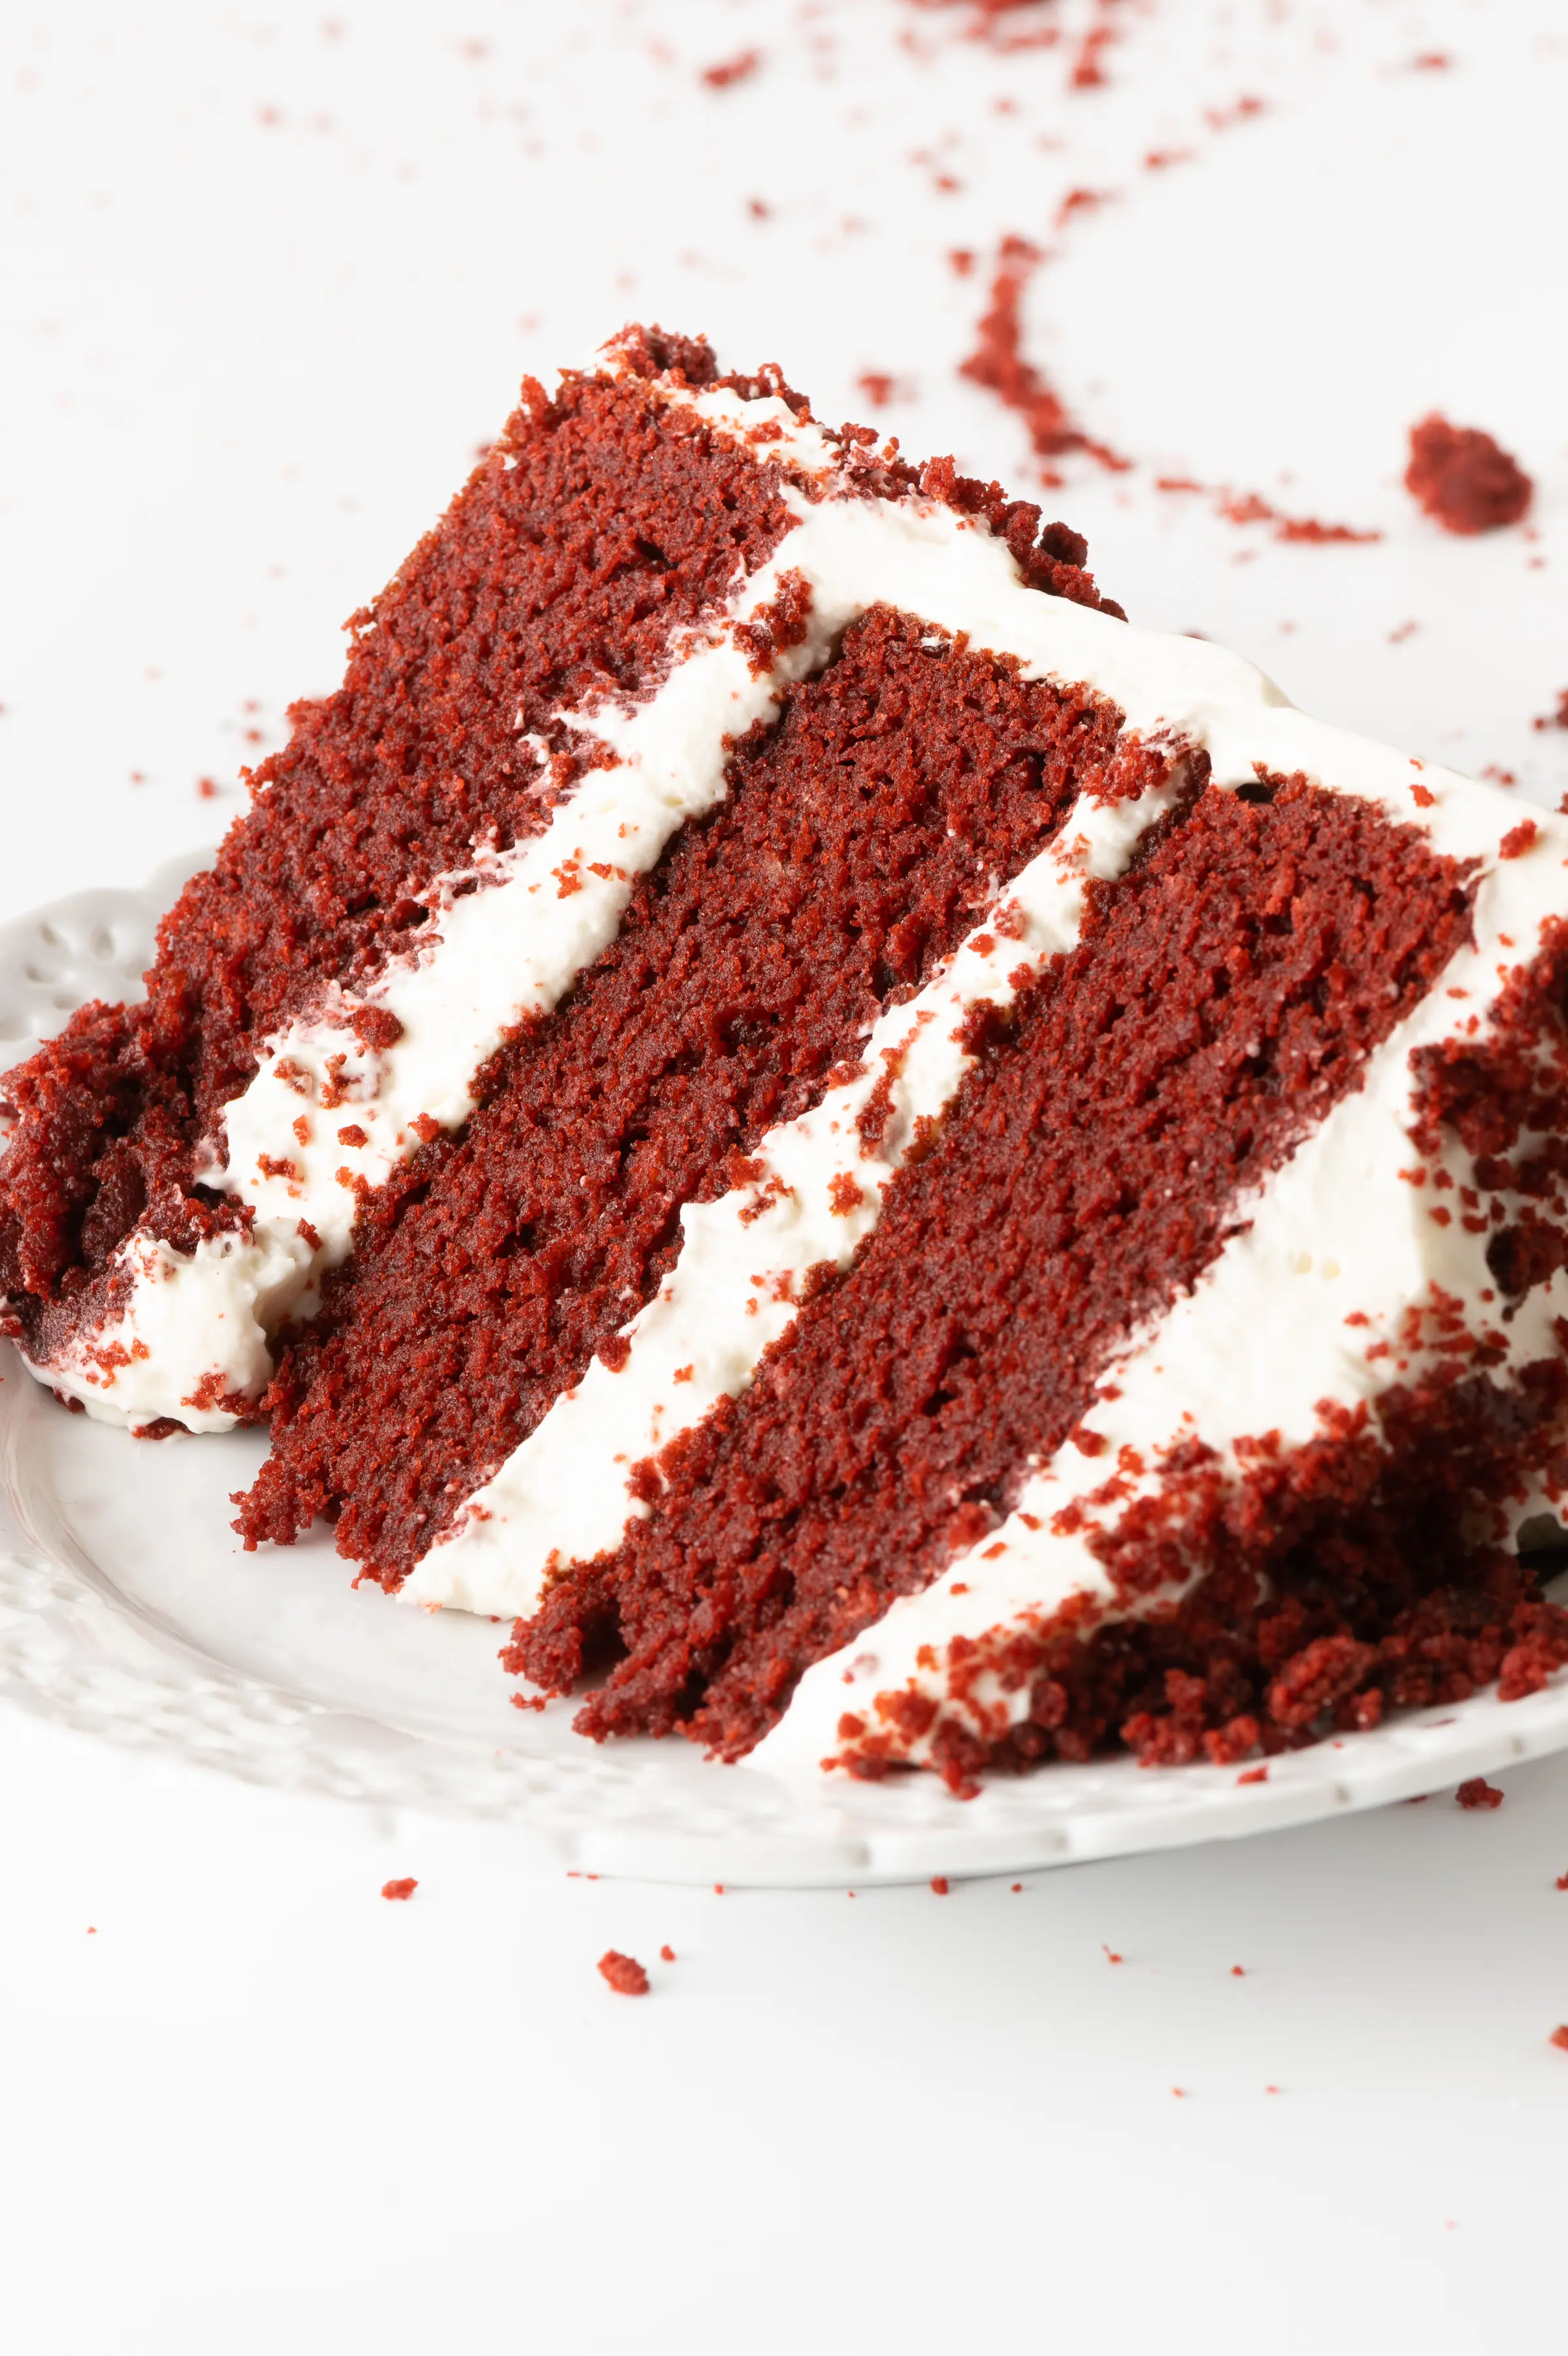 A single slice of bright red maroon red velvet cake with bright white layers of frosting.  The cake is set on a white texture plate and set against a bright white tabletop with red cake crumbs scattered around the plate. 